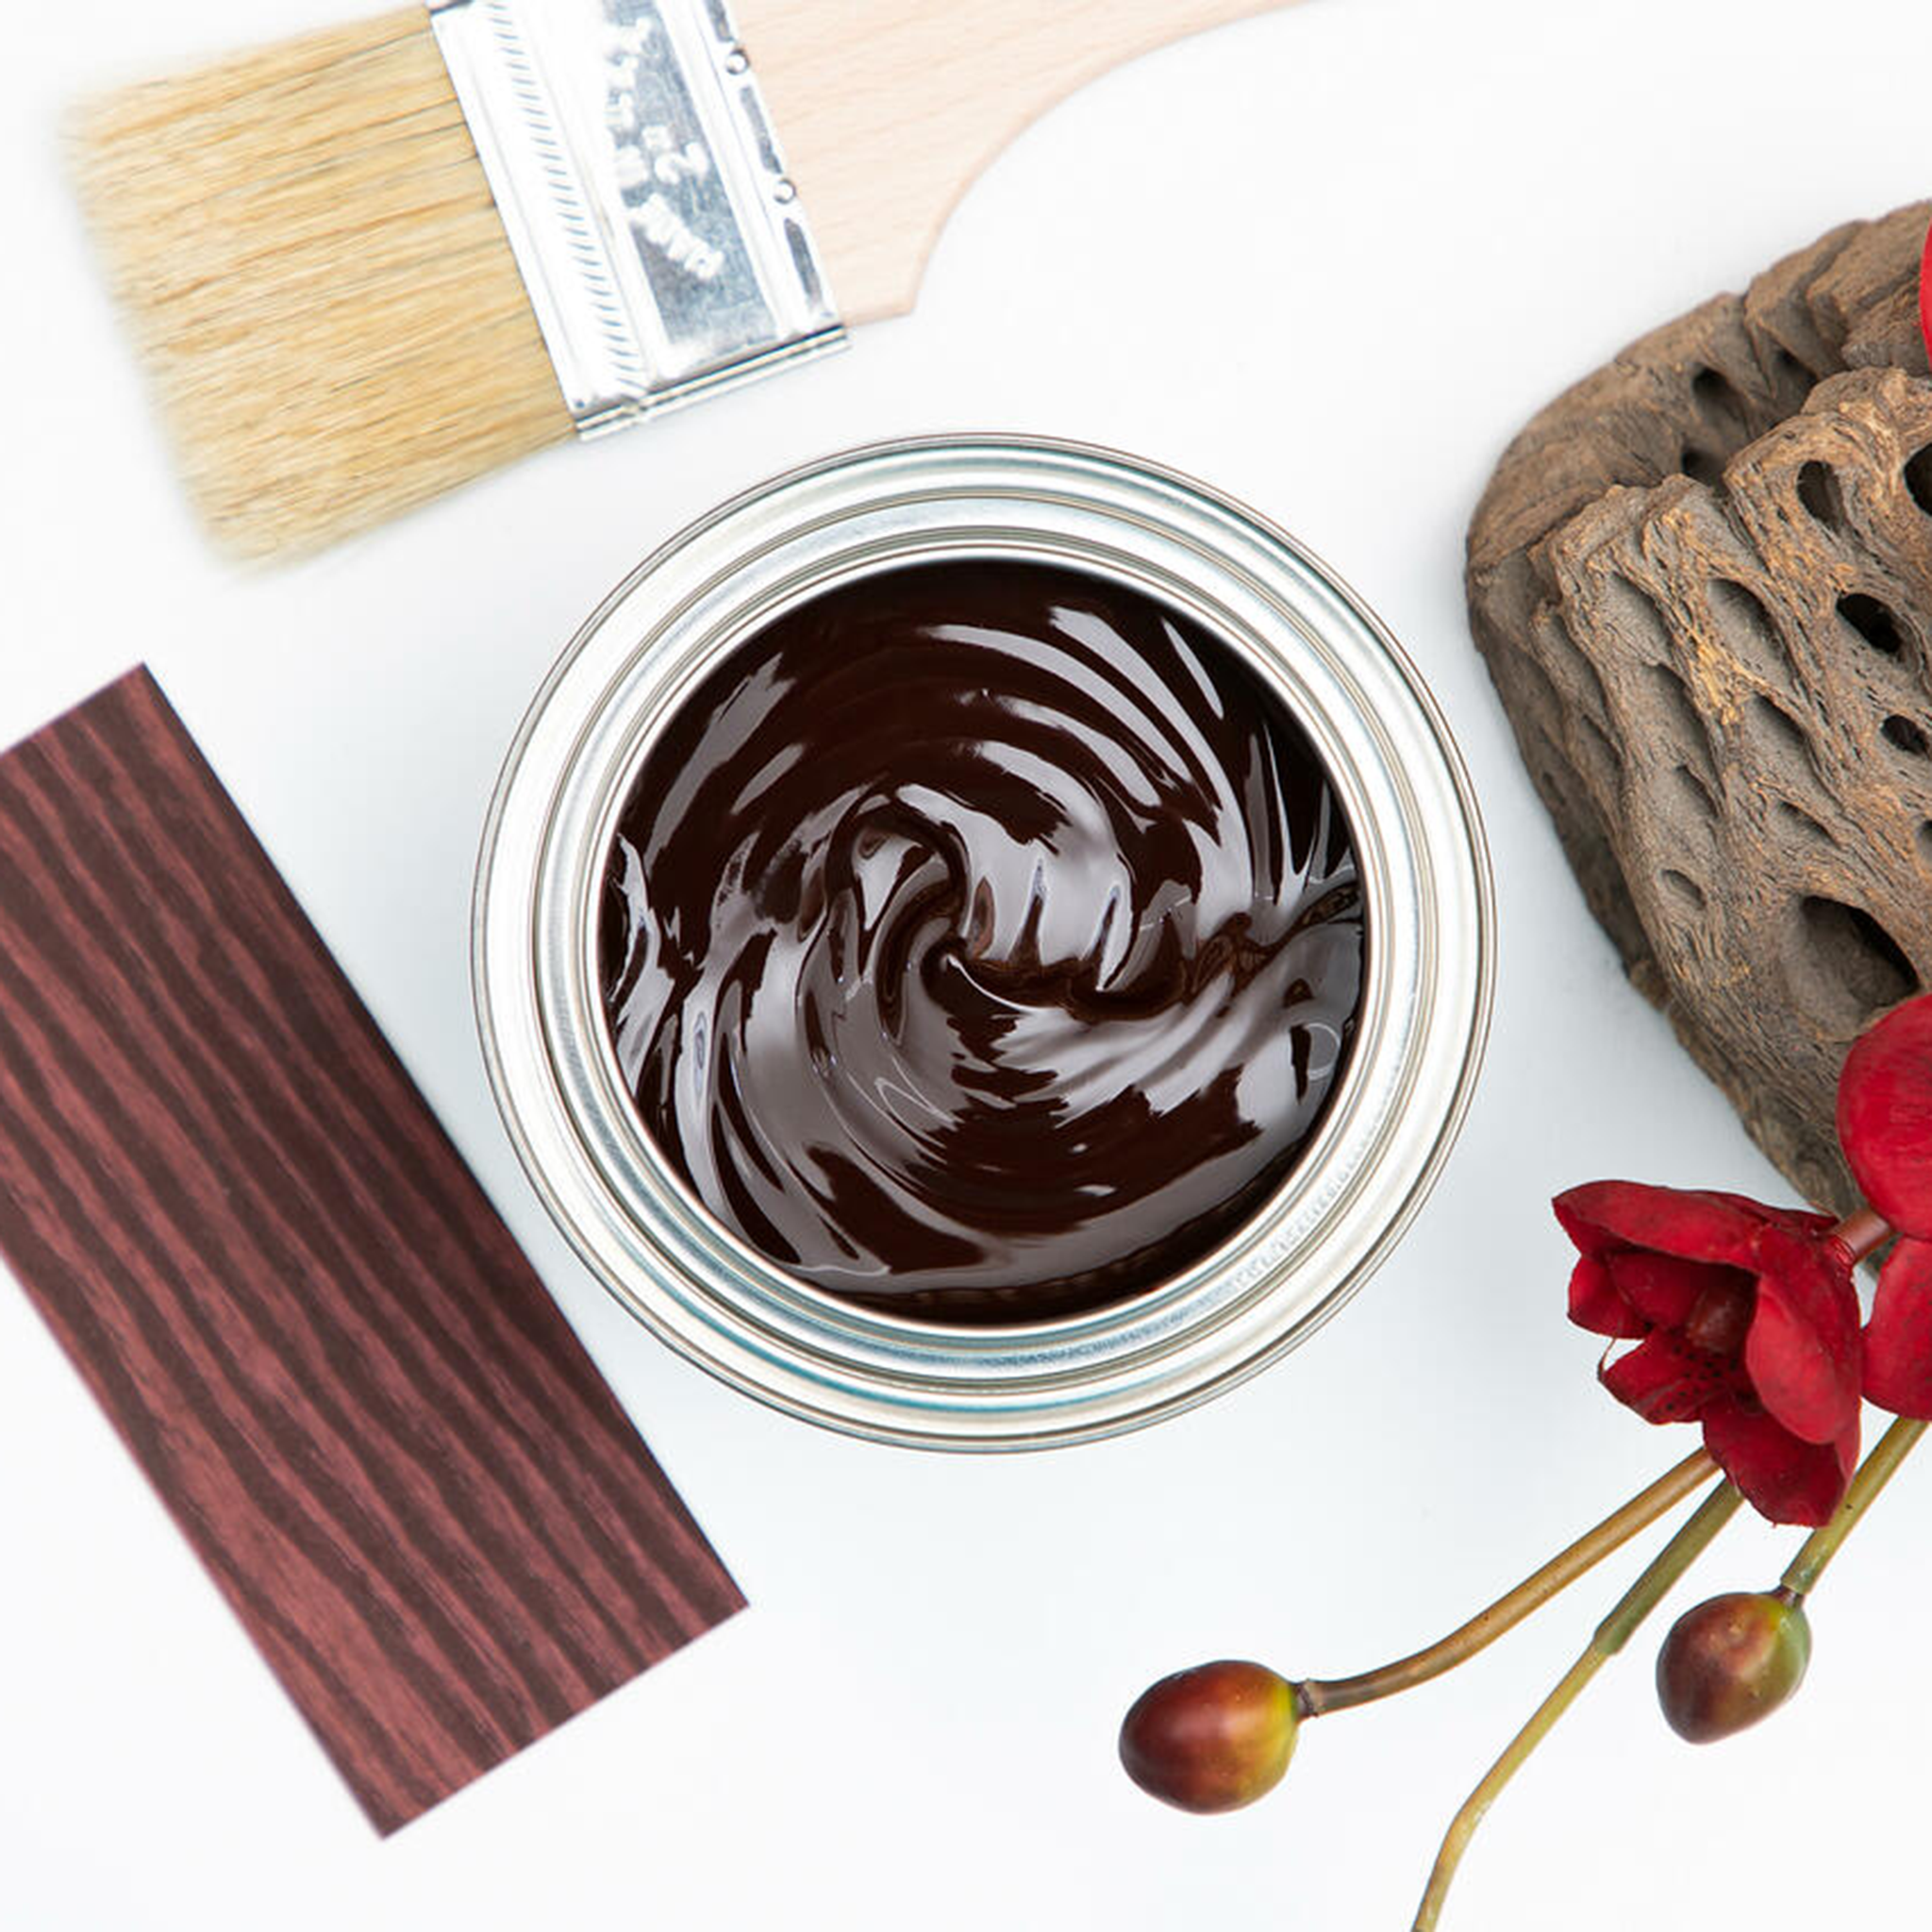 A arial view of an open can of Dixie Belle's No Pain Gel Stain in Georgian Cherry is against a white background. The can is surrounded by a paint brush, a piece of driftwood with red flowers, and a wood swatch featuring the stain color.